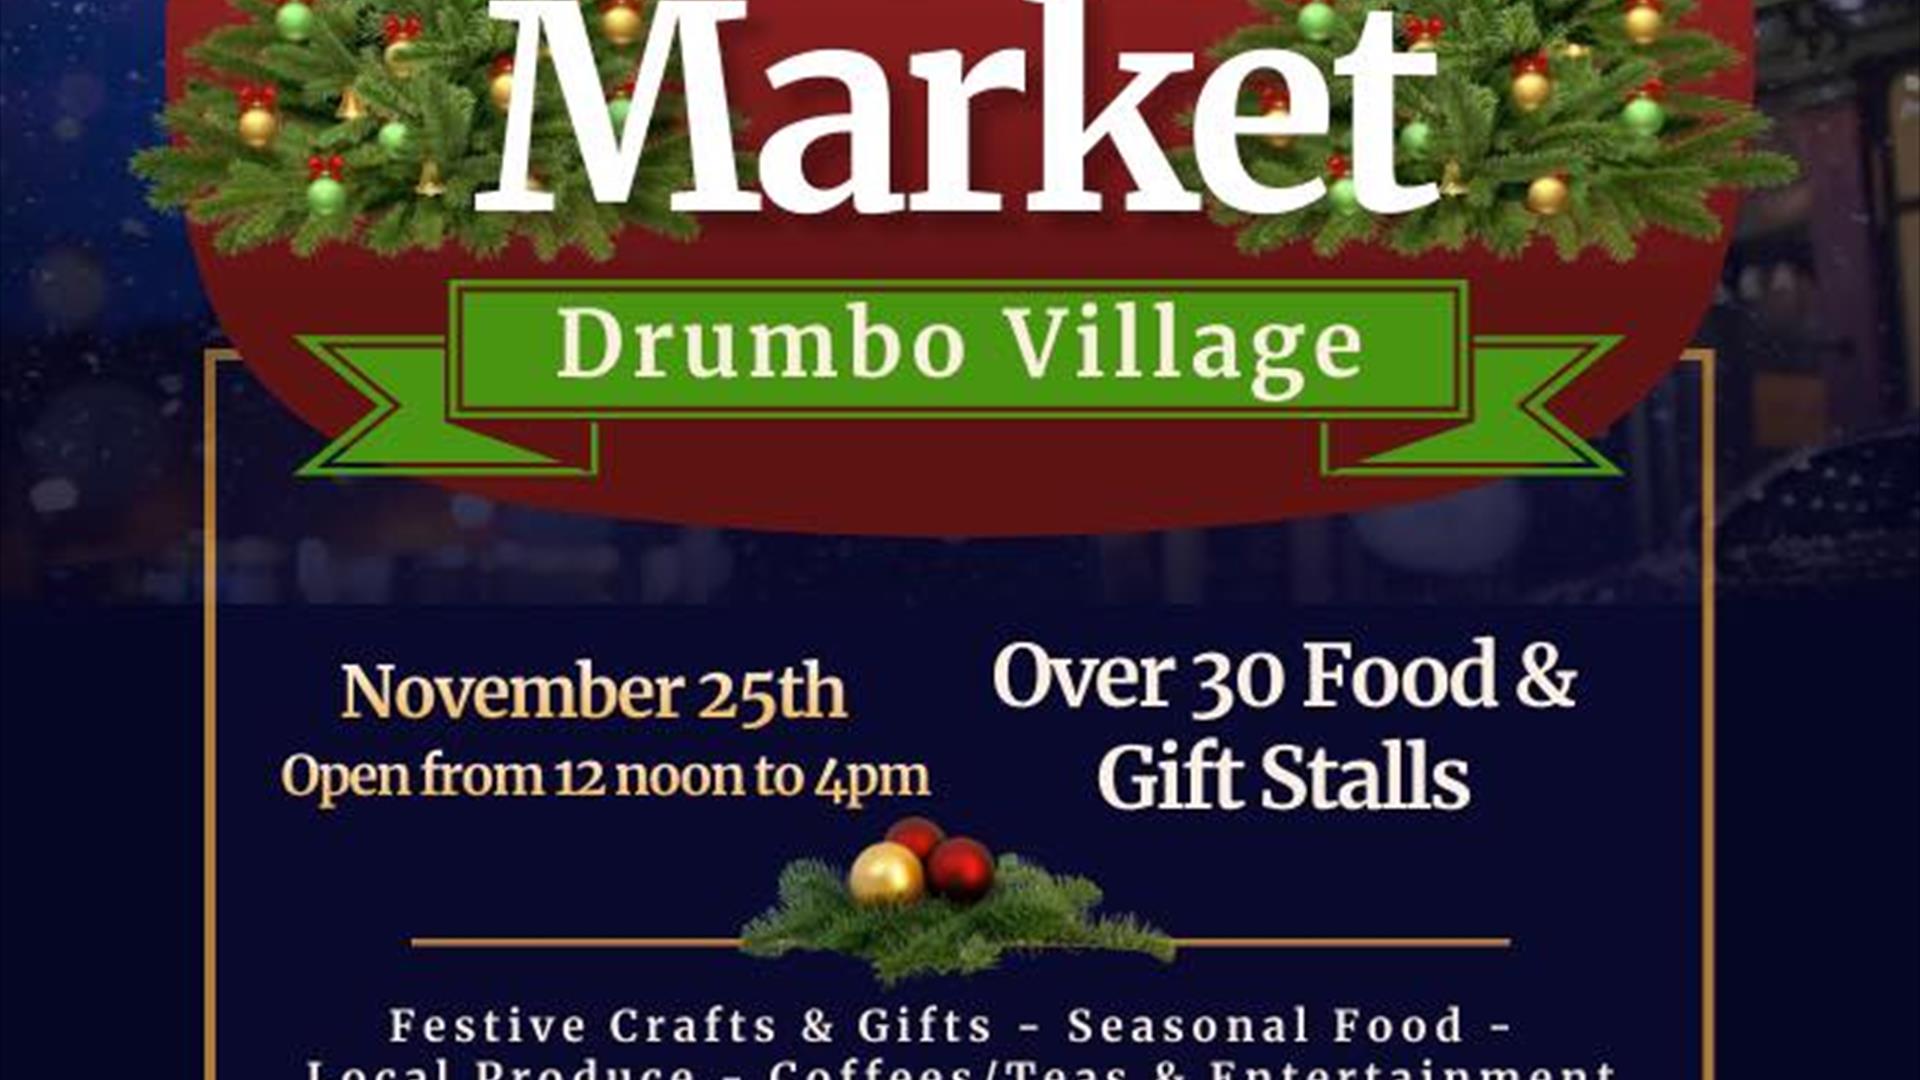 Image is poster of the Christmas Market being held in Drumbo Village